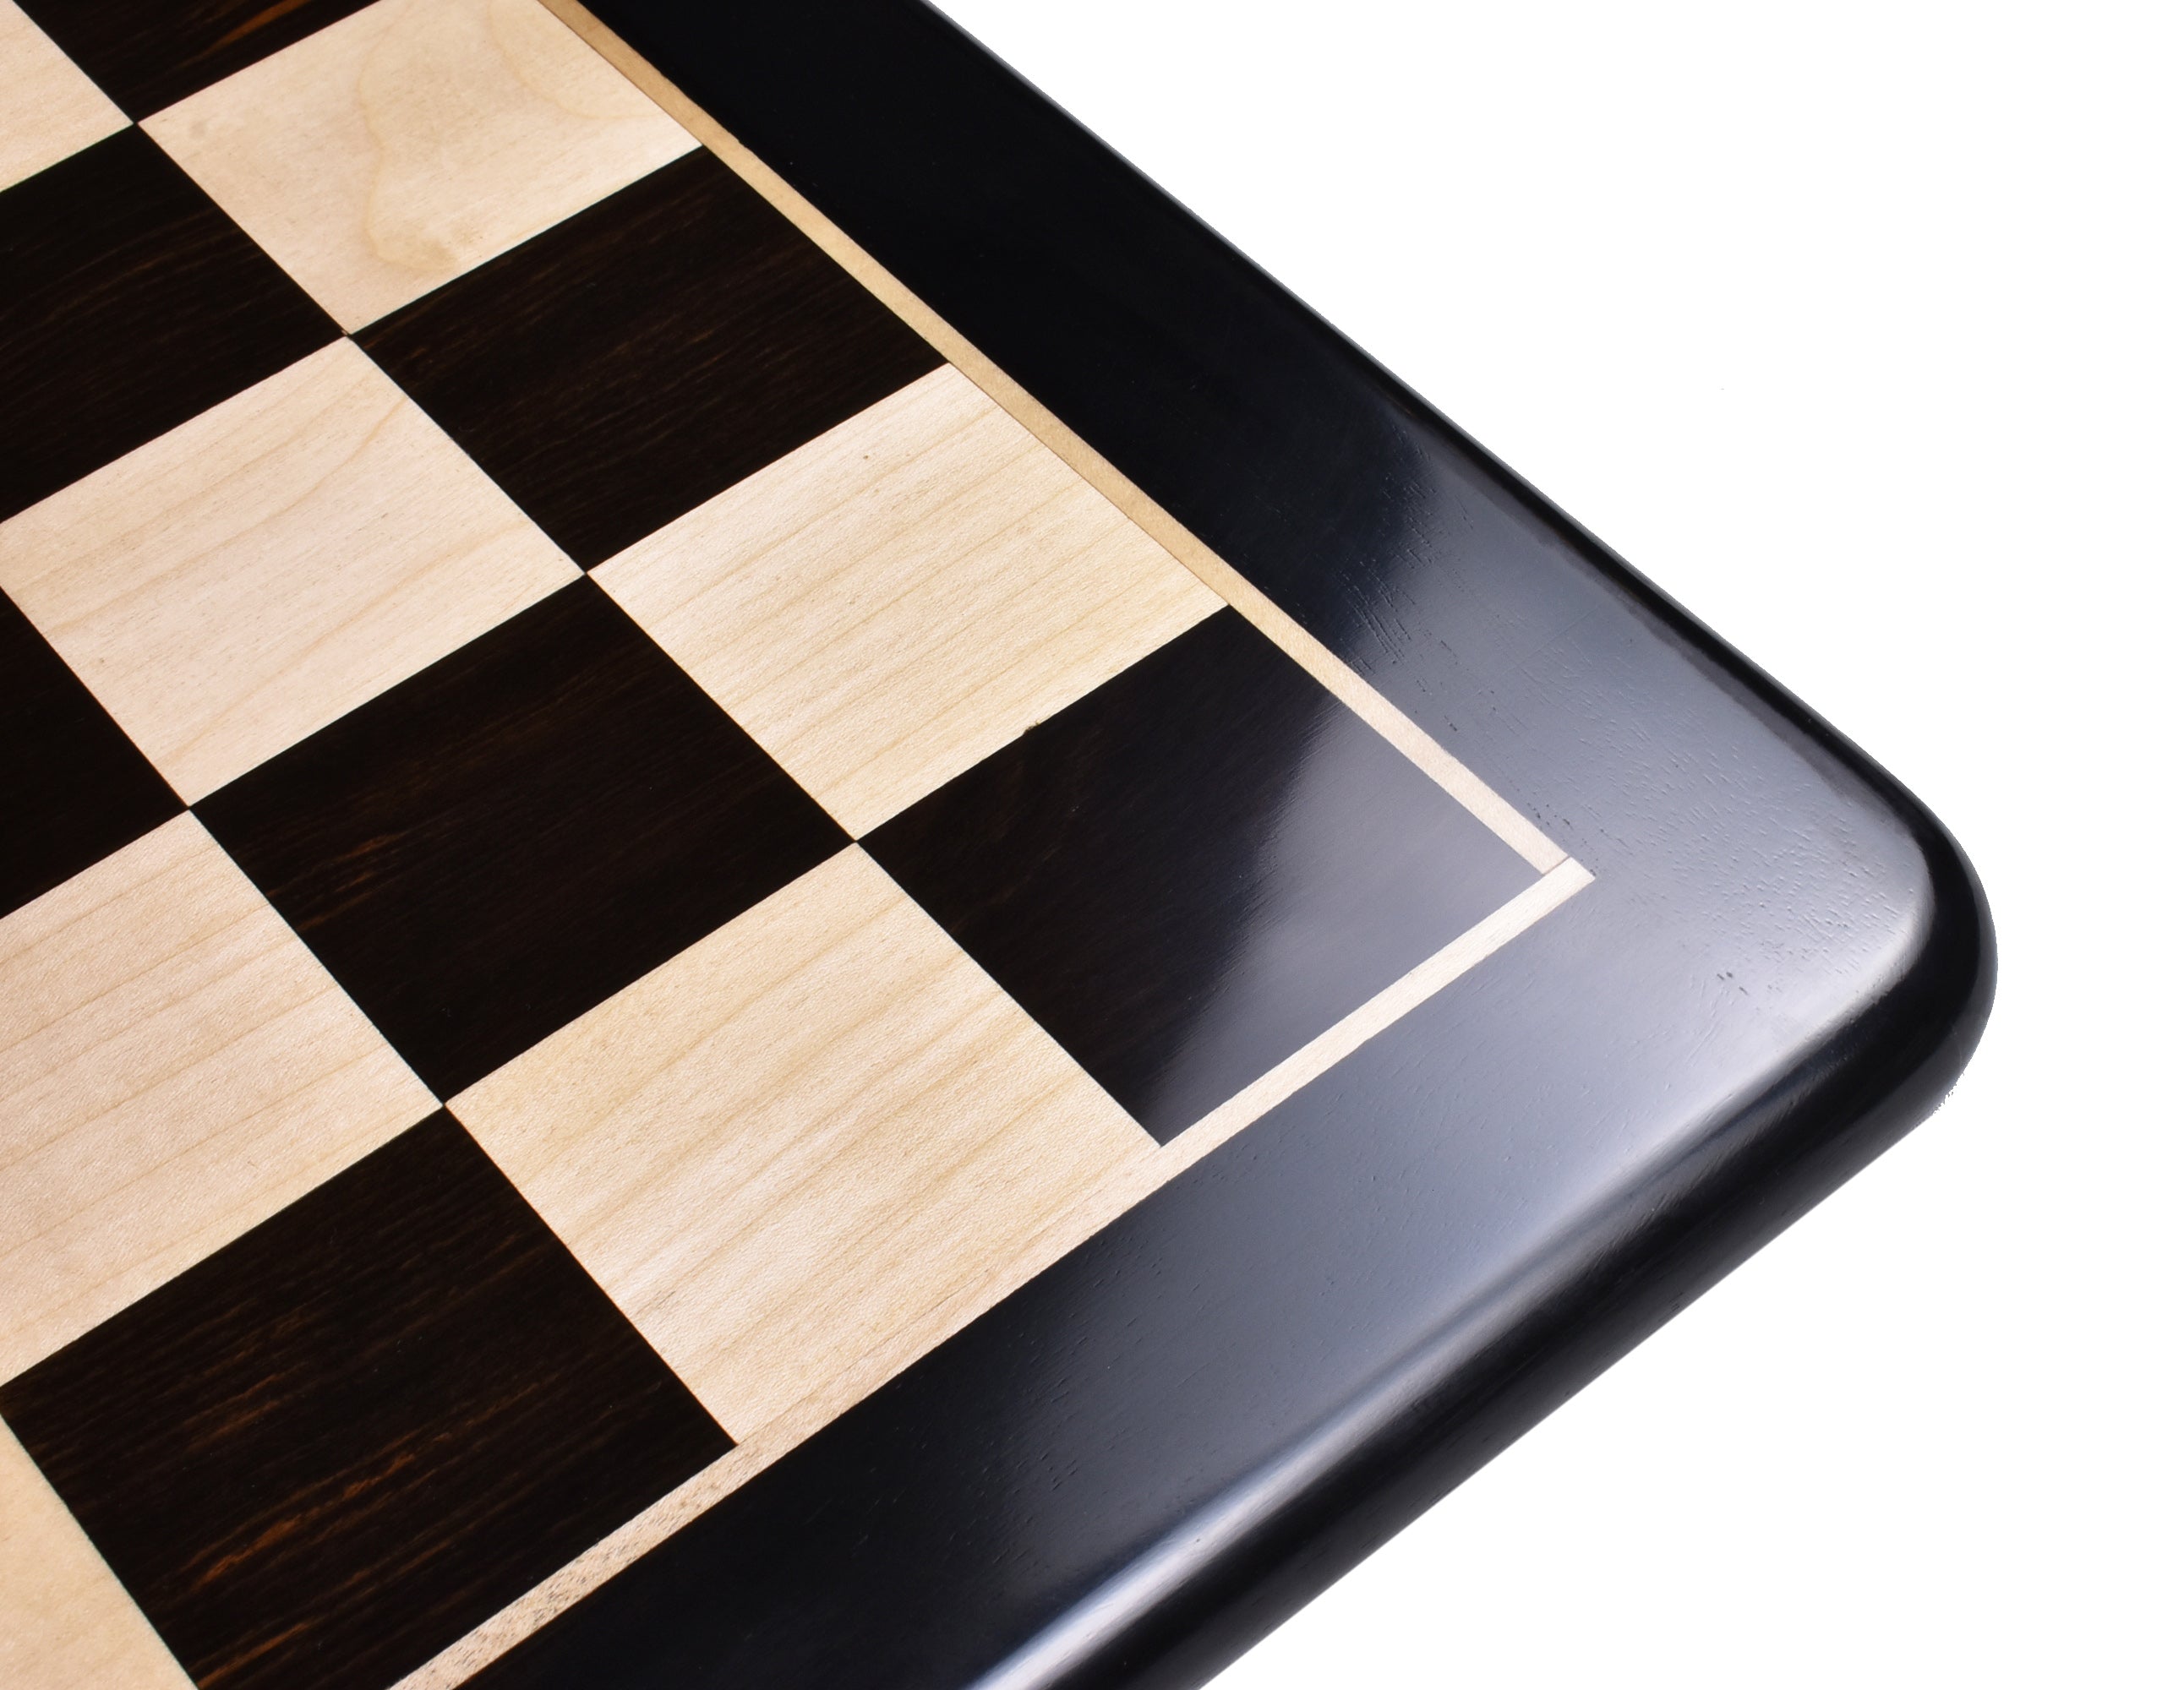 Combo of Chamfered Base Staunton Chess Set - Pieces in Ebony Wood with Board and Box